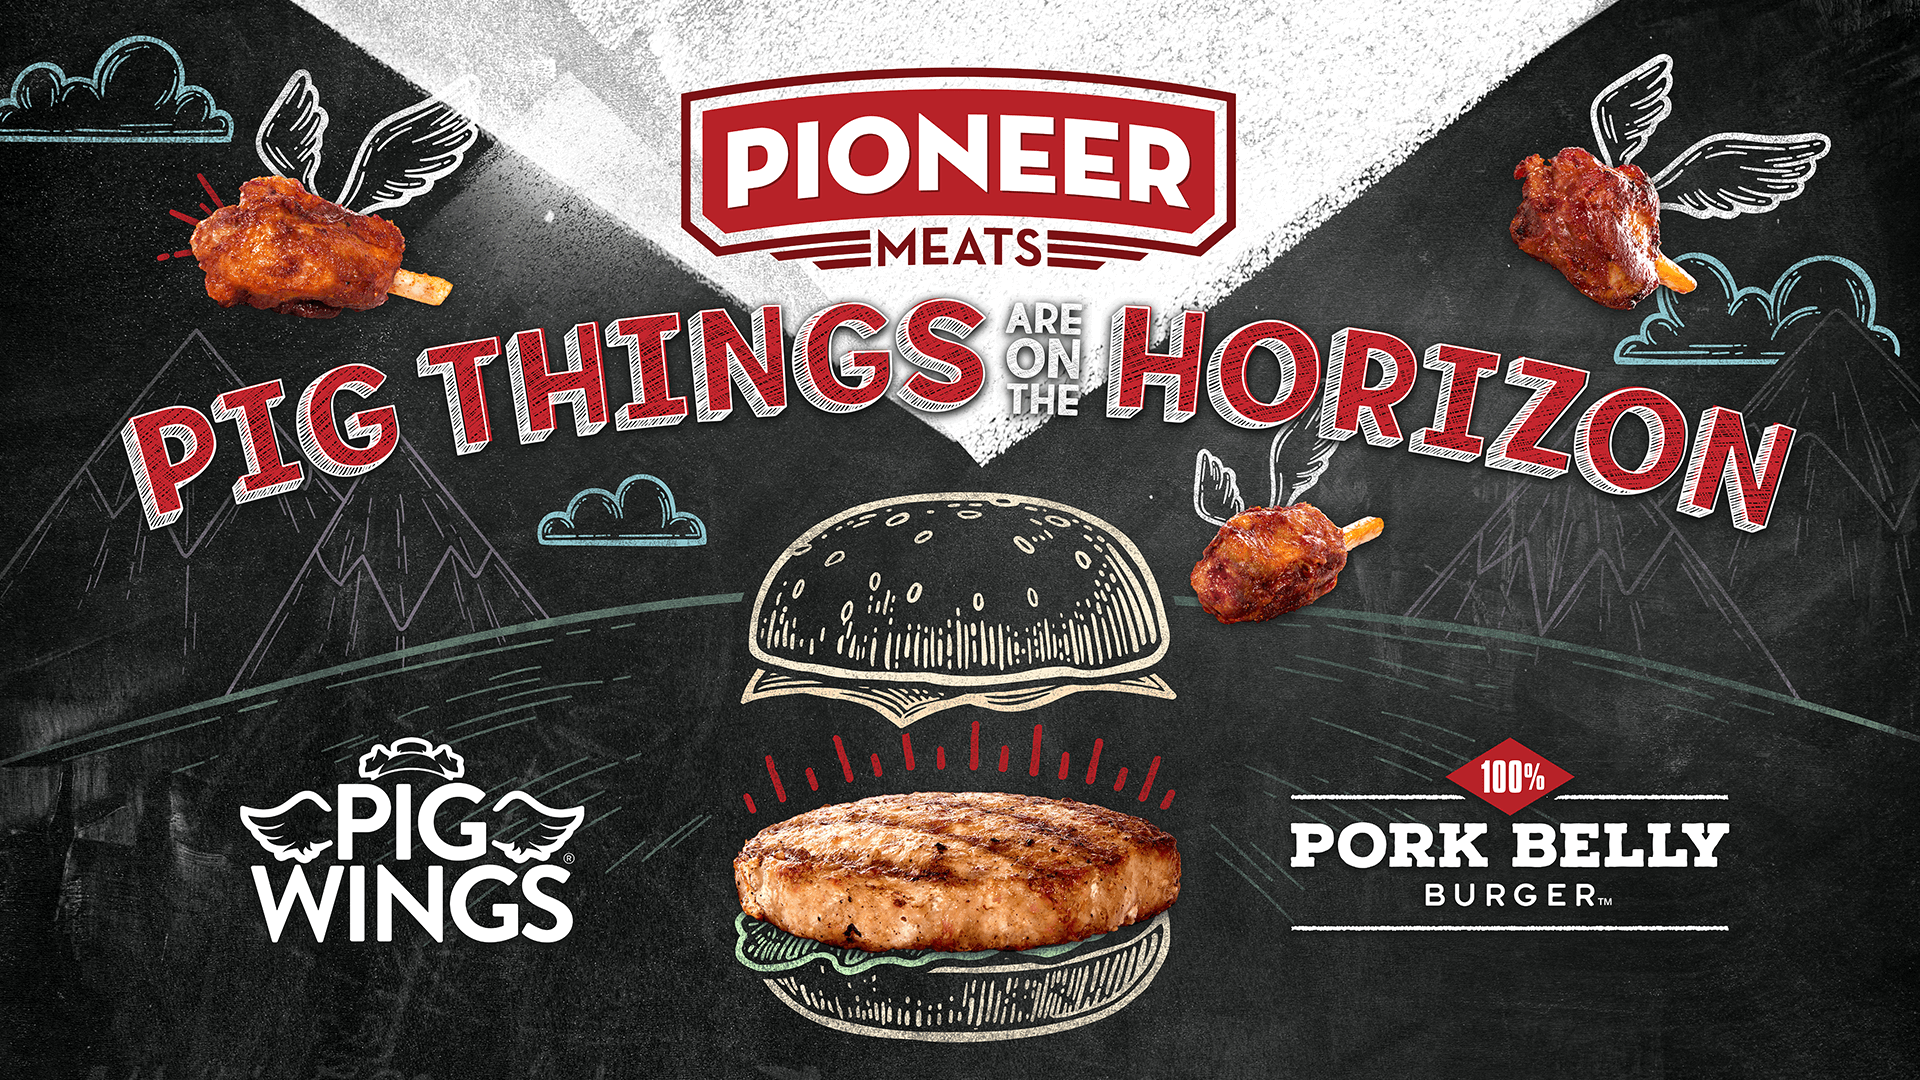 Pioneer Meats manufactures and sells superior-quality meat products to distributors and directly to food services and restaurants.